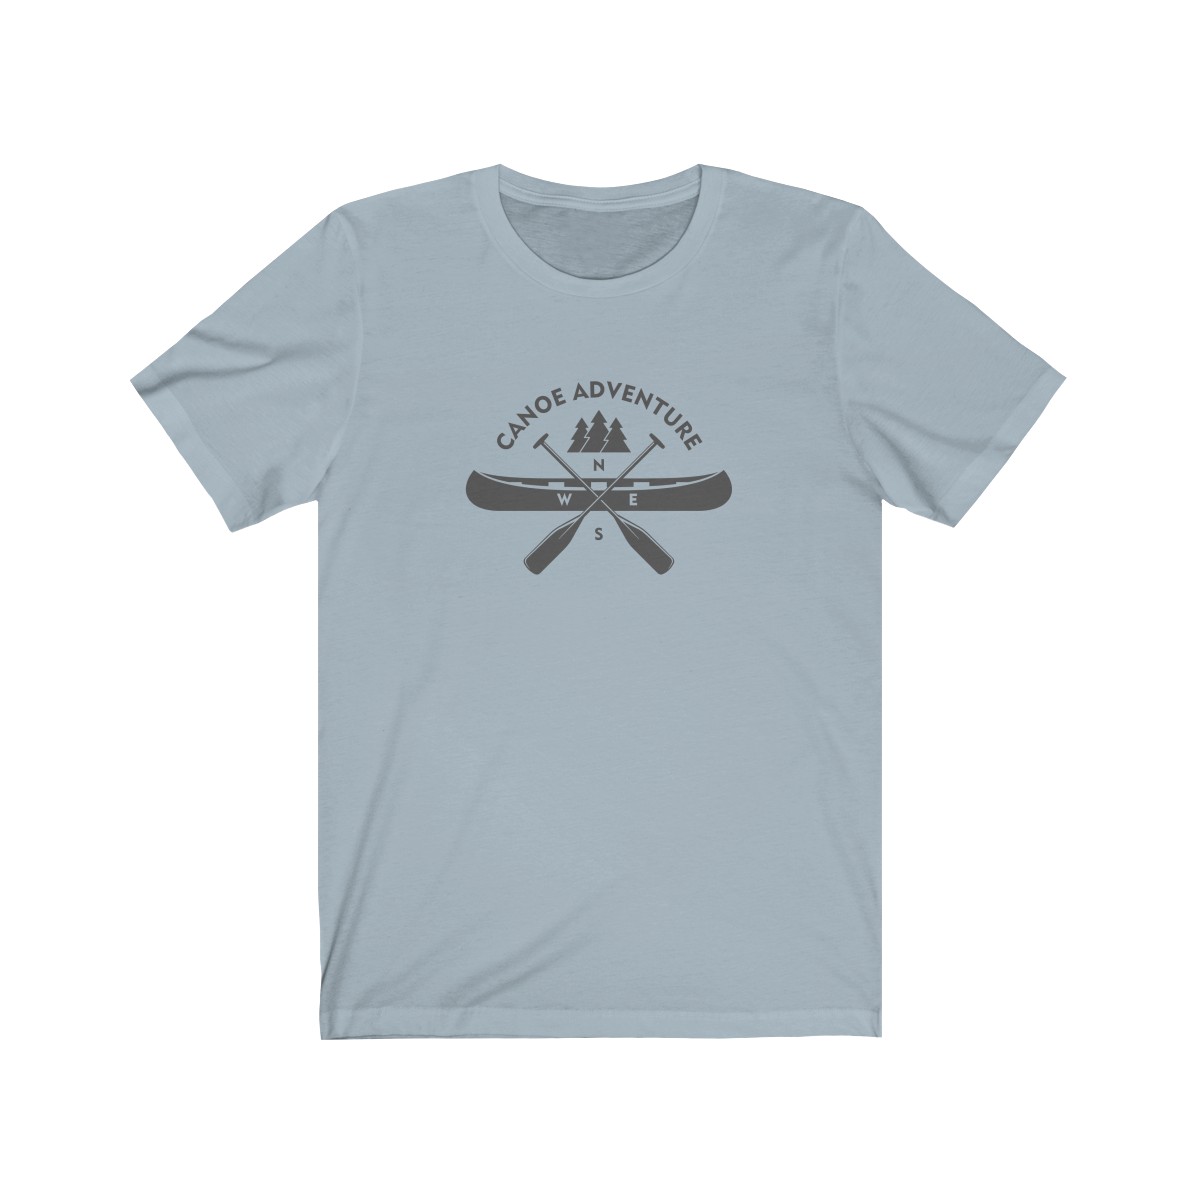 Featured image for “Canoe Adventure - Unisex Soft Cotton Tee”